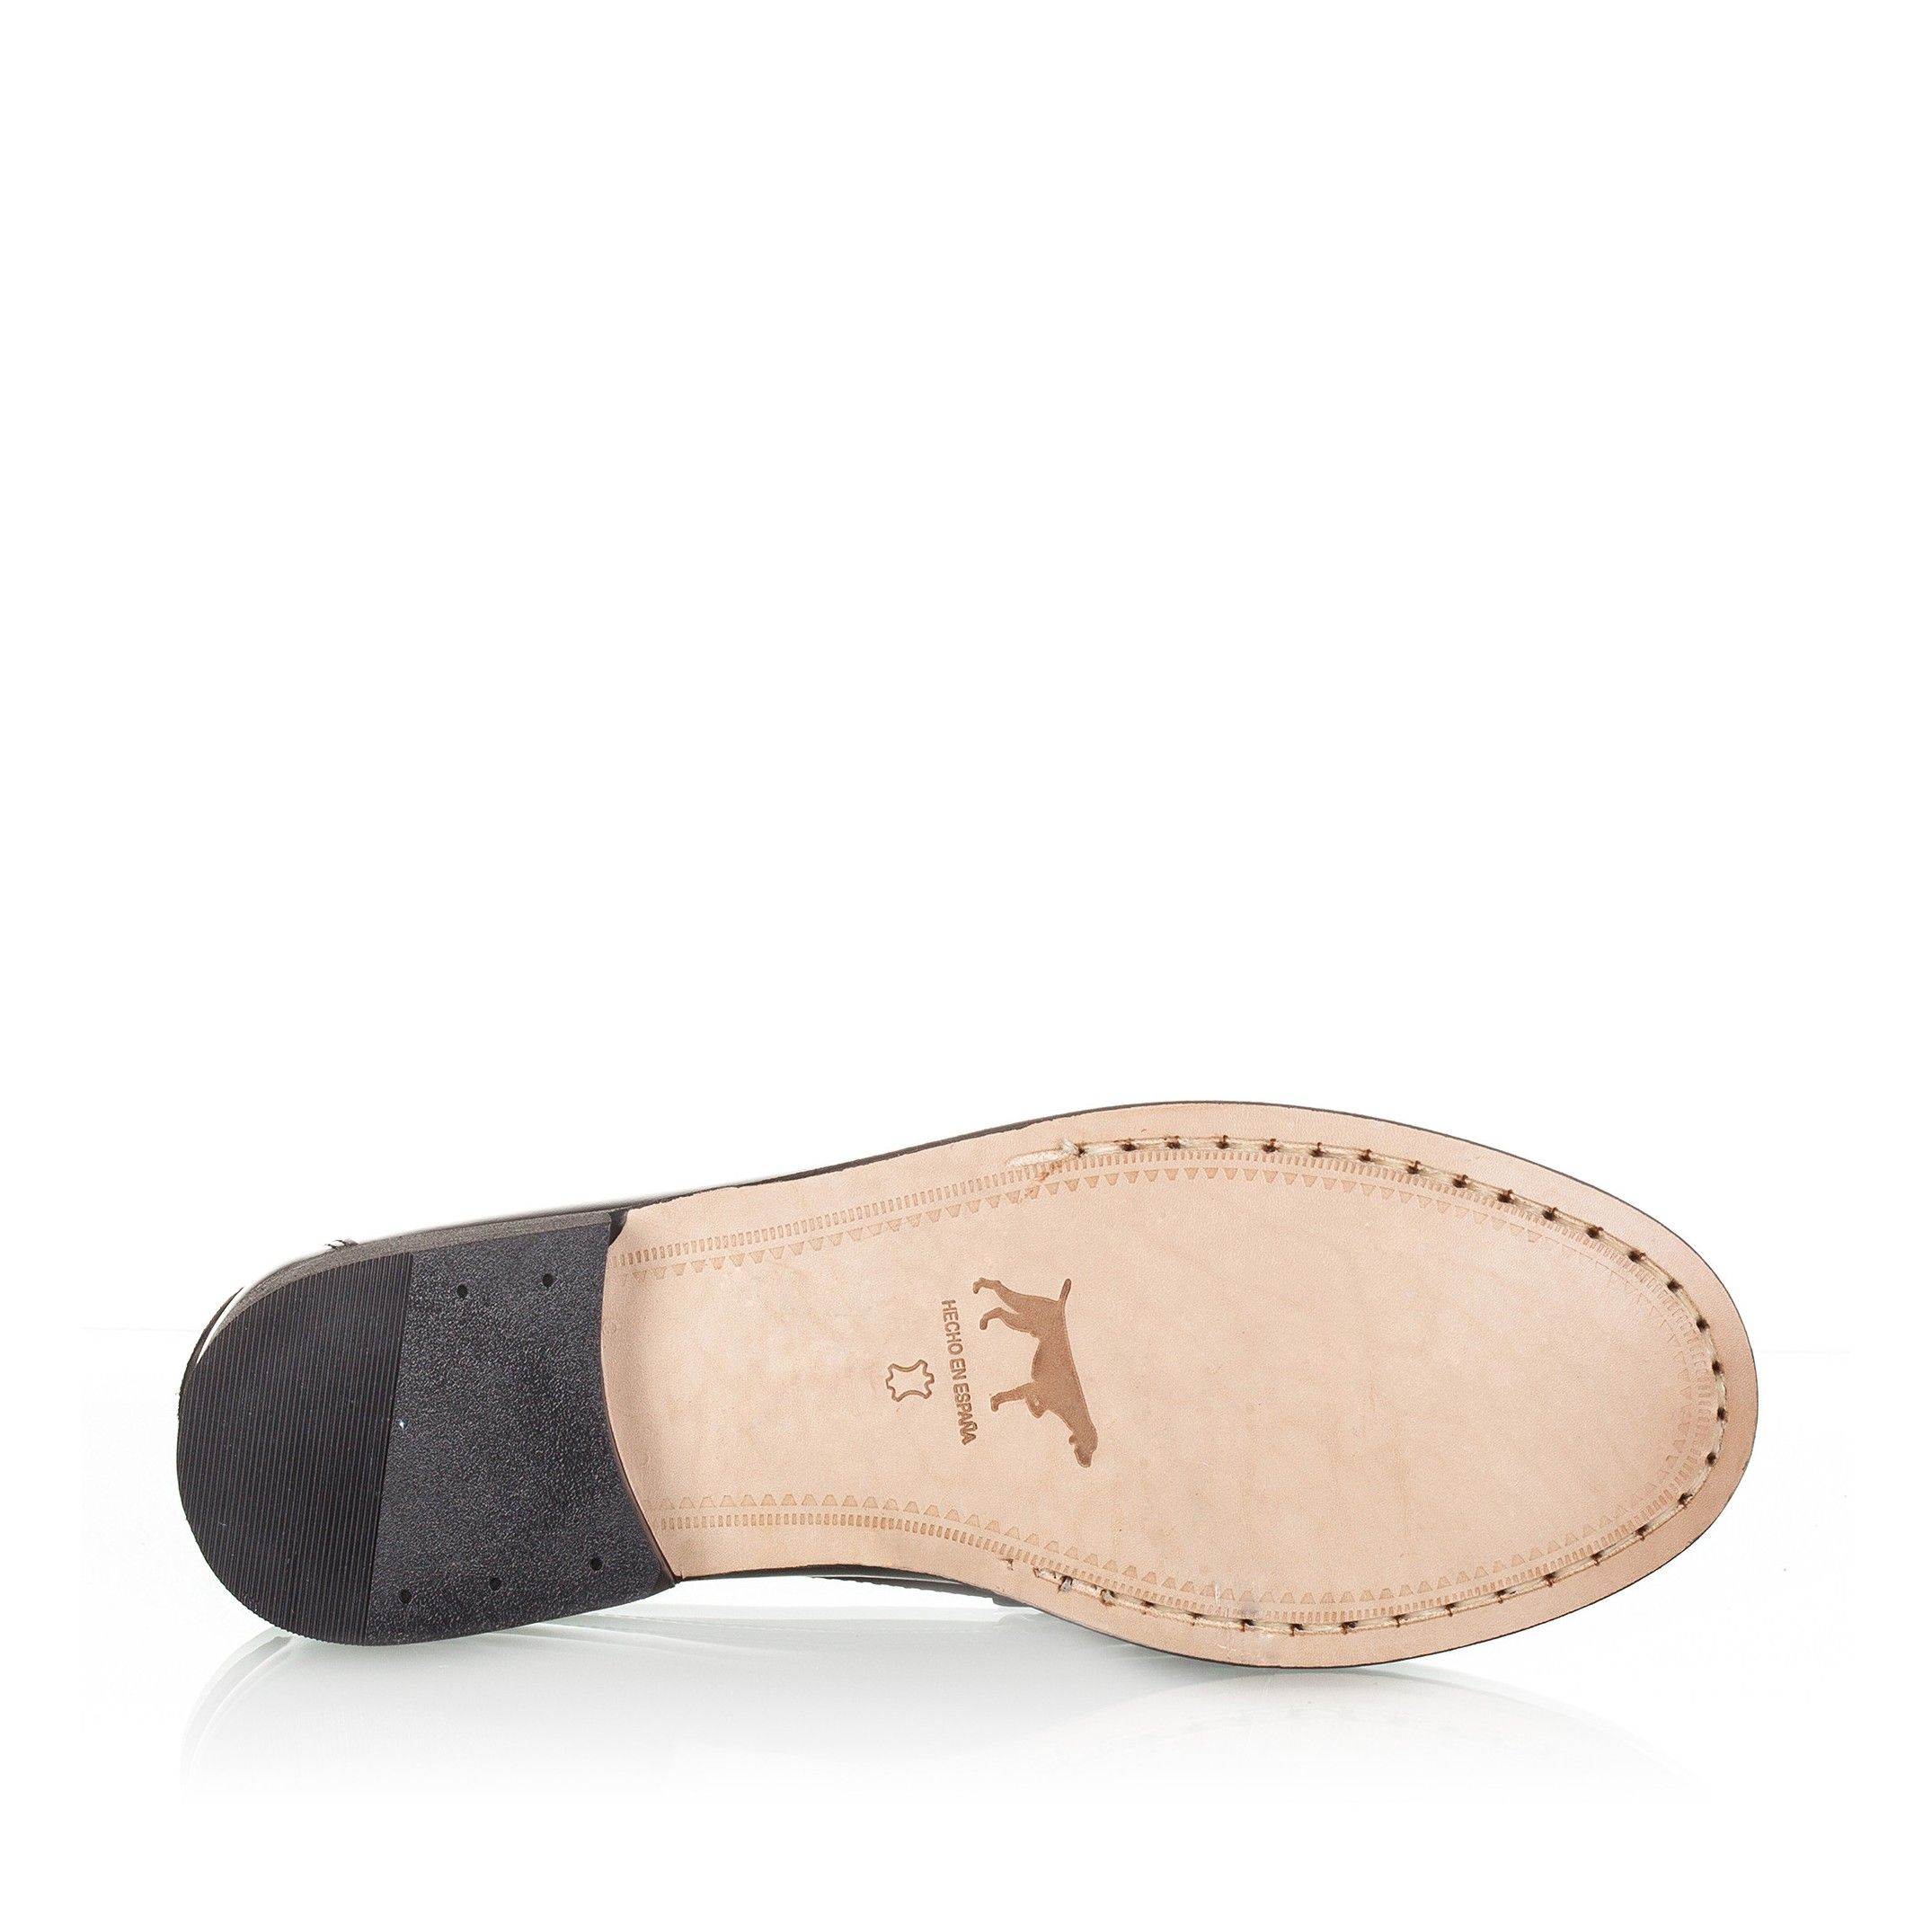 One of the three classic models of Castellanísimos. Its existence explains the success of the brand. Leather moccasins with mask. Comfortable and made with quality material. Upper, inner and insole made of florentic leather. Sole sewn of leather. Spanish product. Ideal for men, for the formal events, meetings or parties, both summer and winter. Colors in burgundy, black and brown.